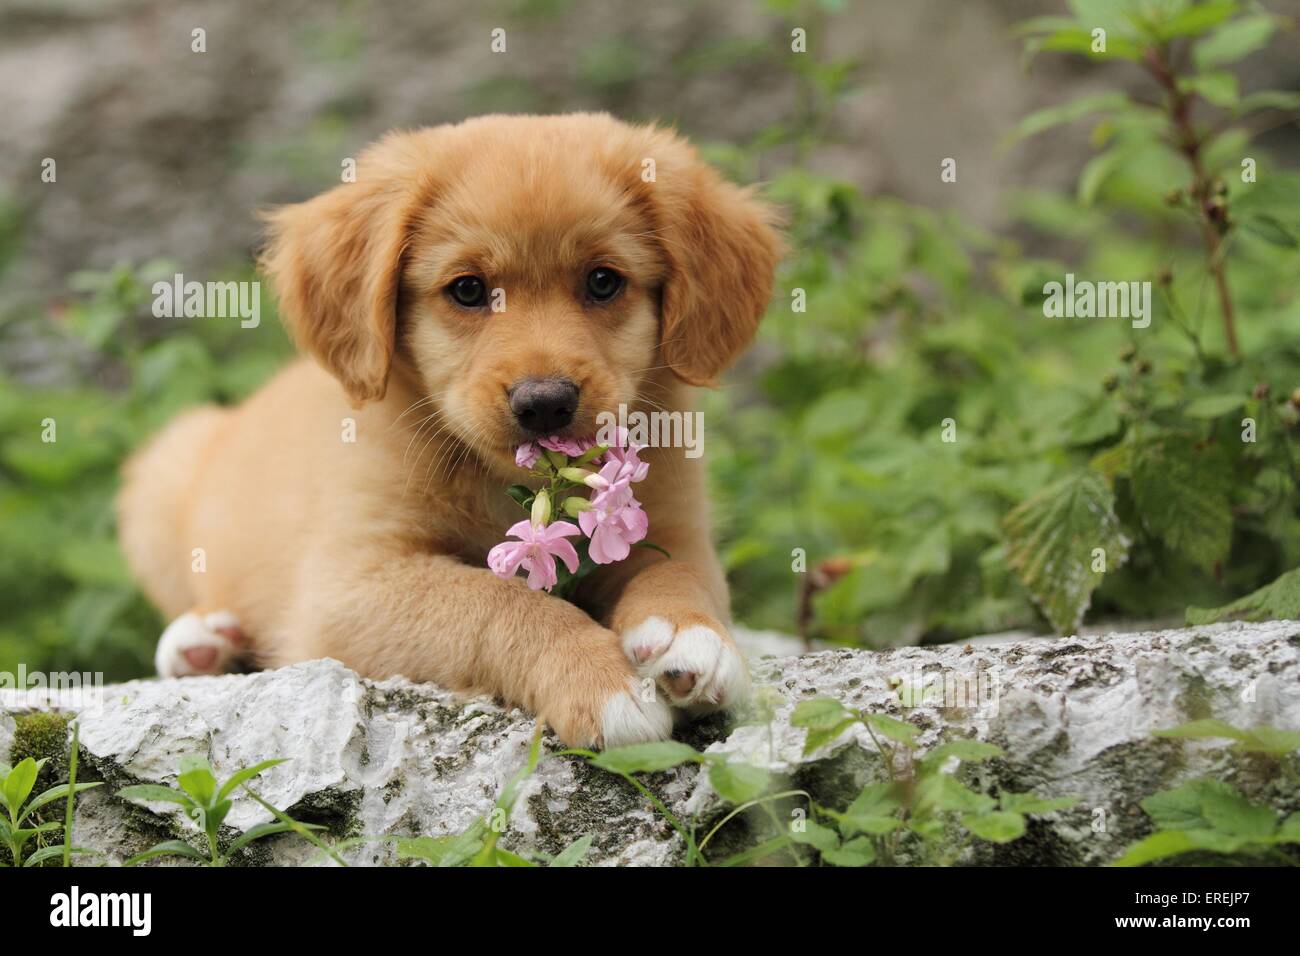 Page 3 - Toller Puppy High Resolution Stock Photography and Images - Alamy